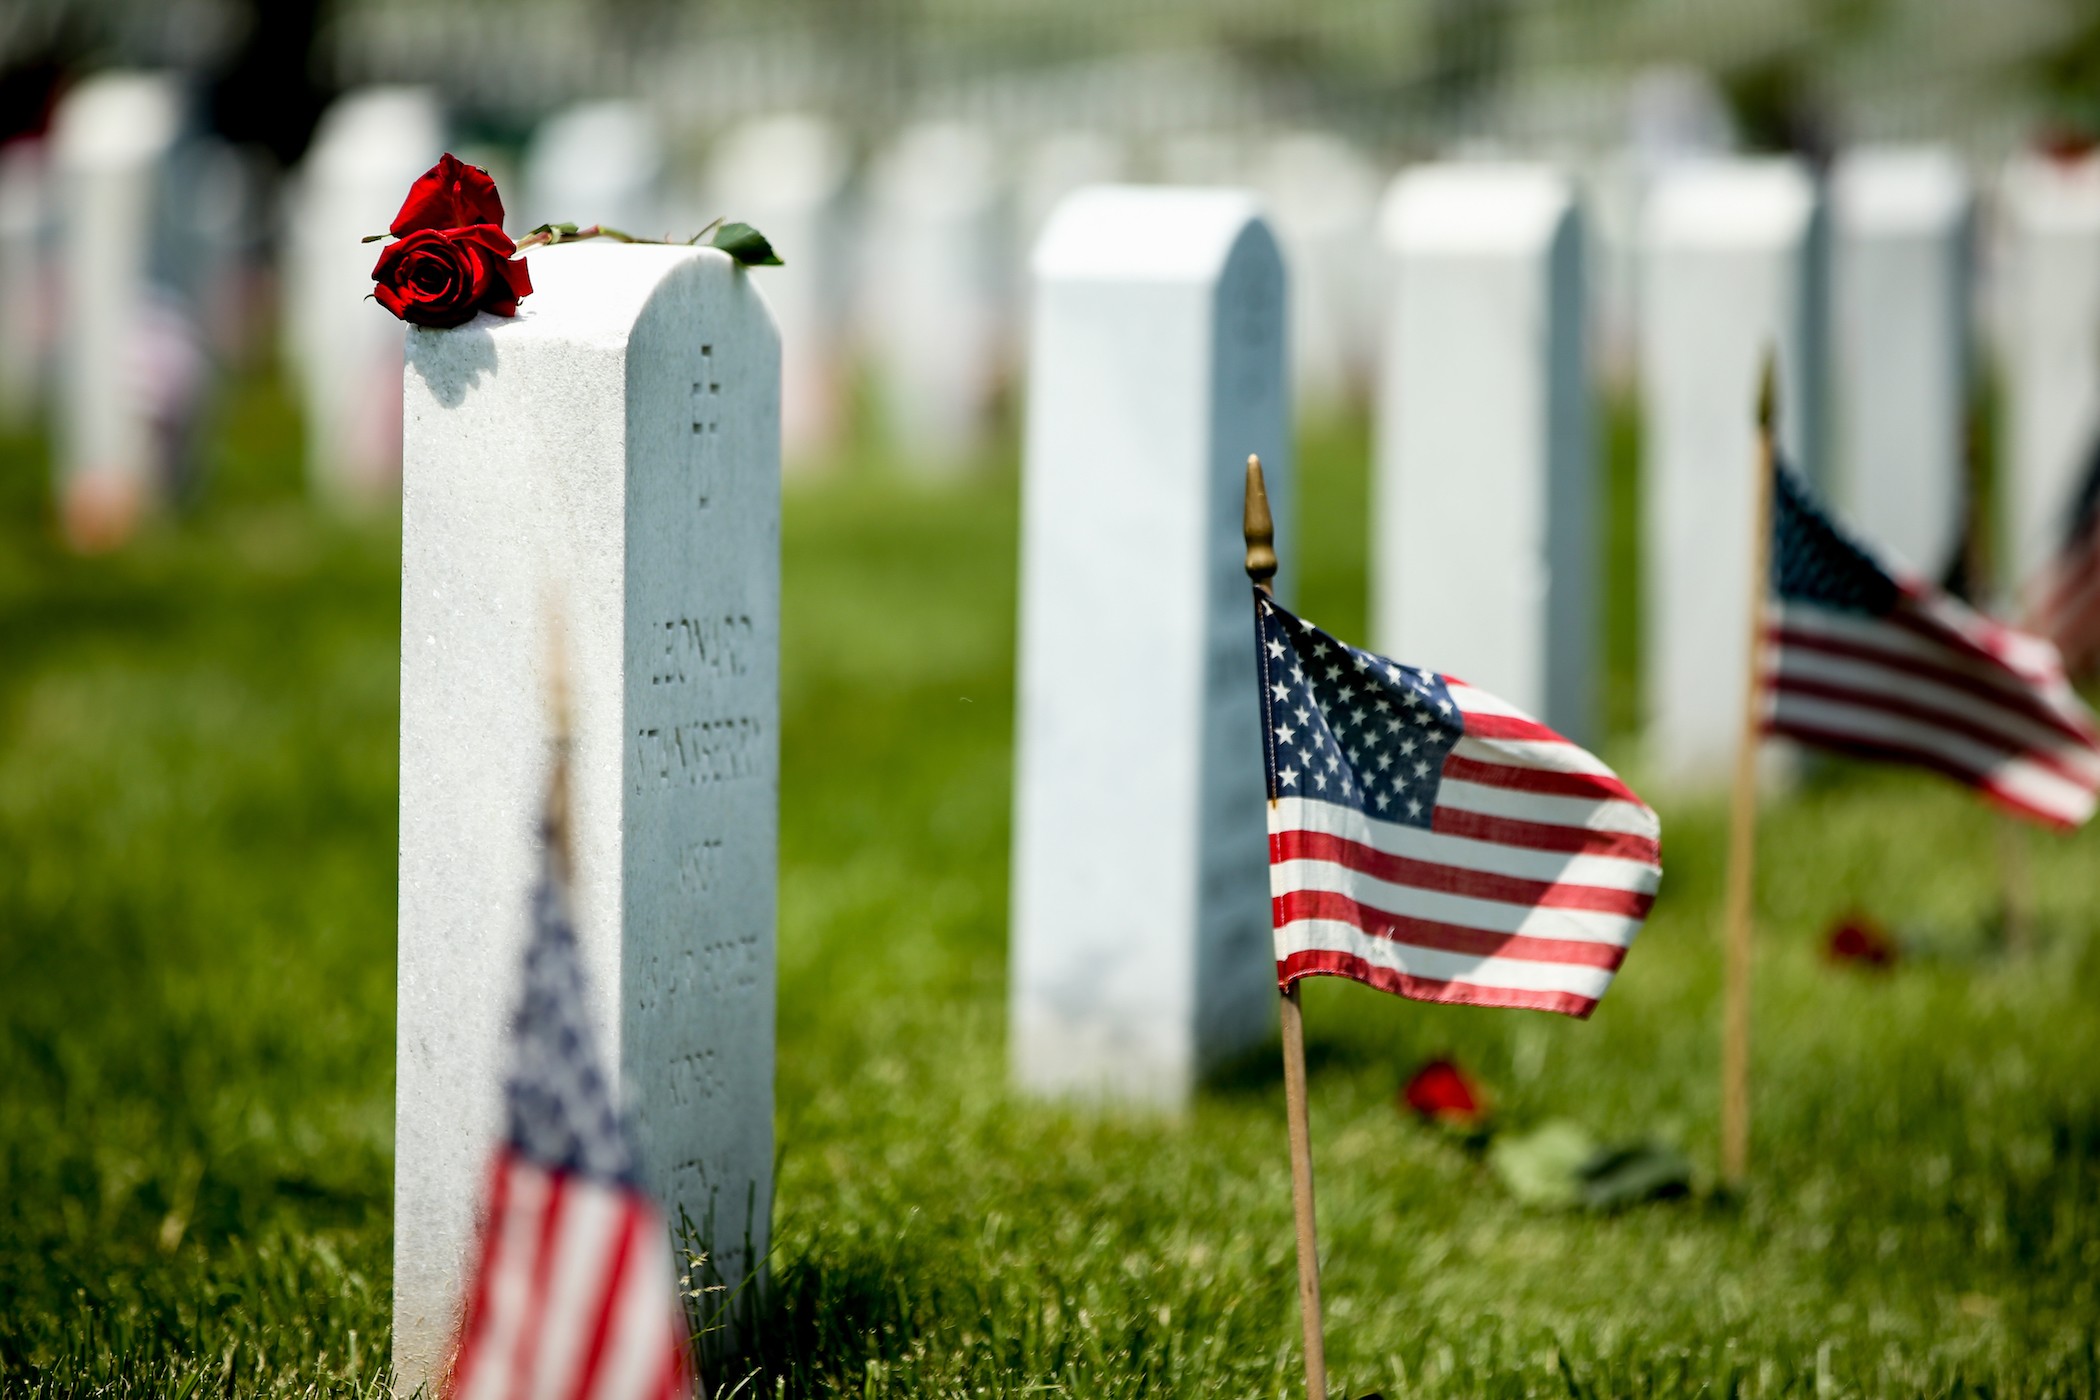 This Memorial Day, stay safe and have fun but please don't forget to take a moment and remember what this day is truly about.